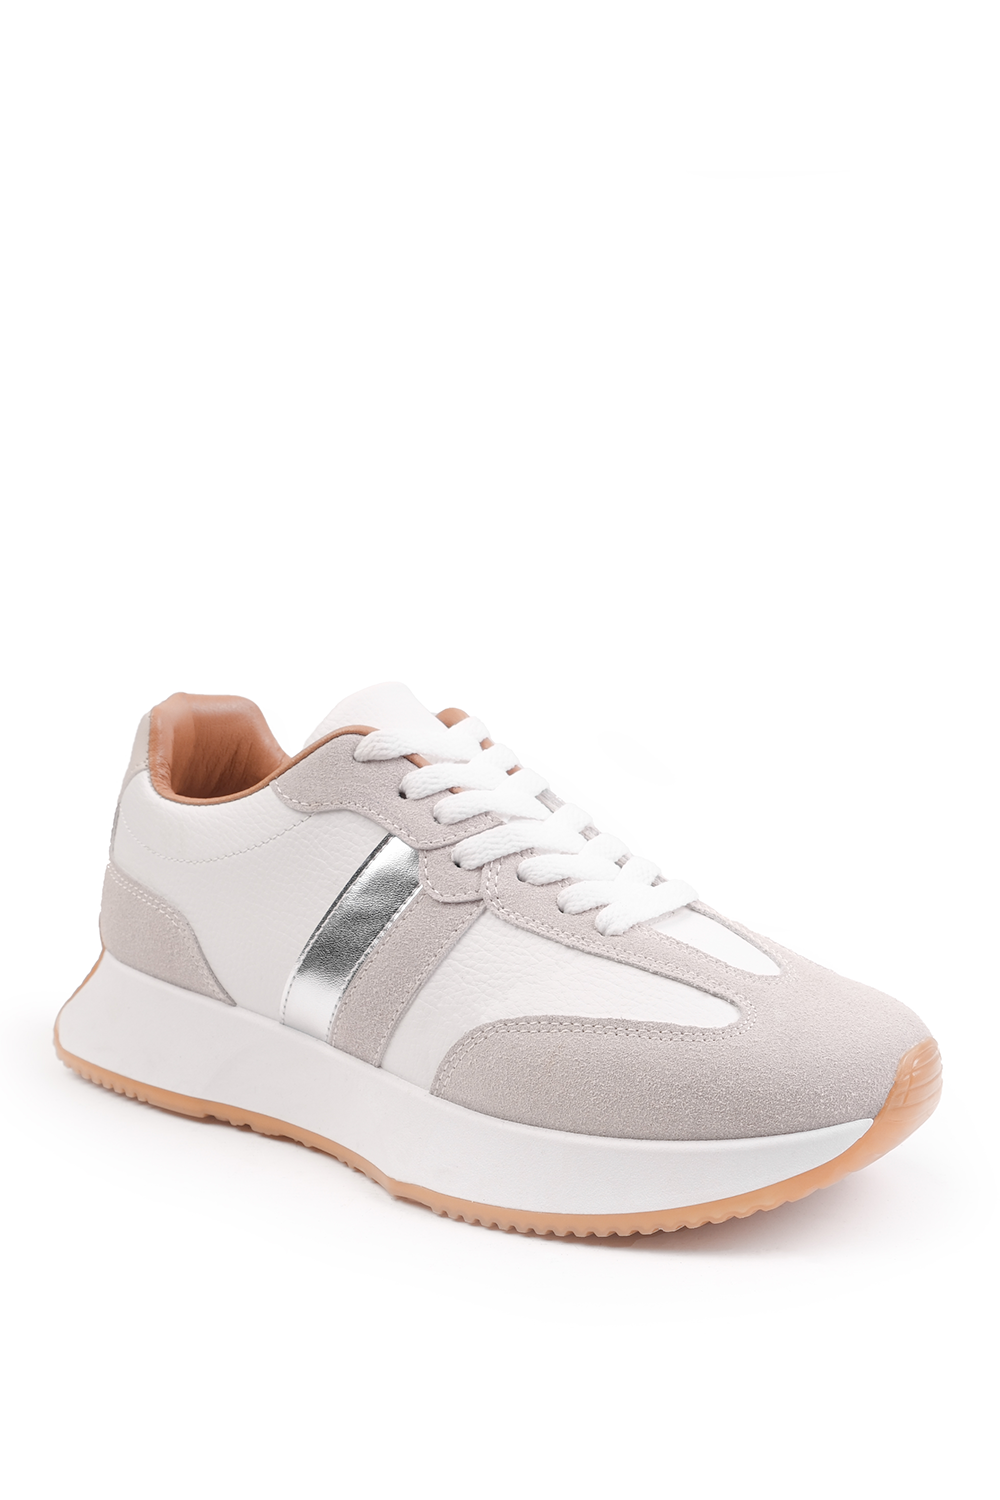 PULSE RUNNER SNEAKERS TRAINERS IN WHITE FAUX LEATHER